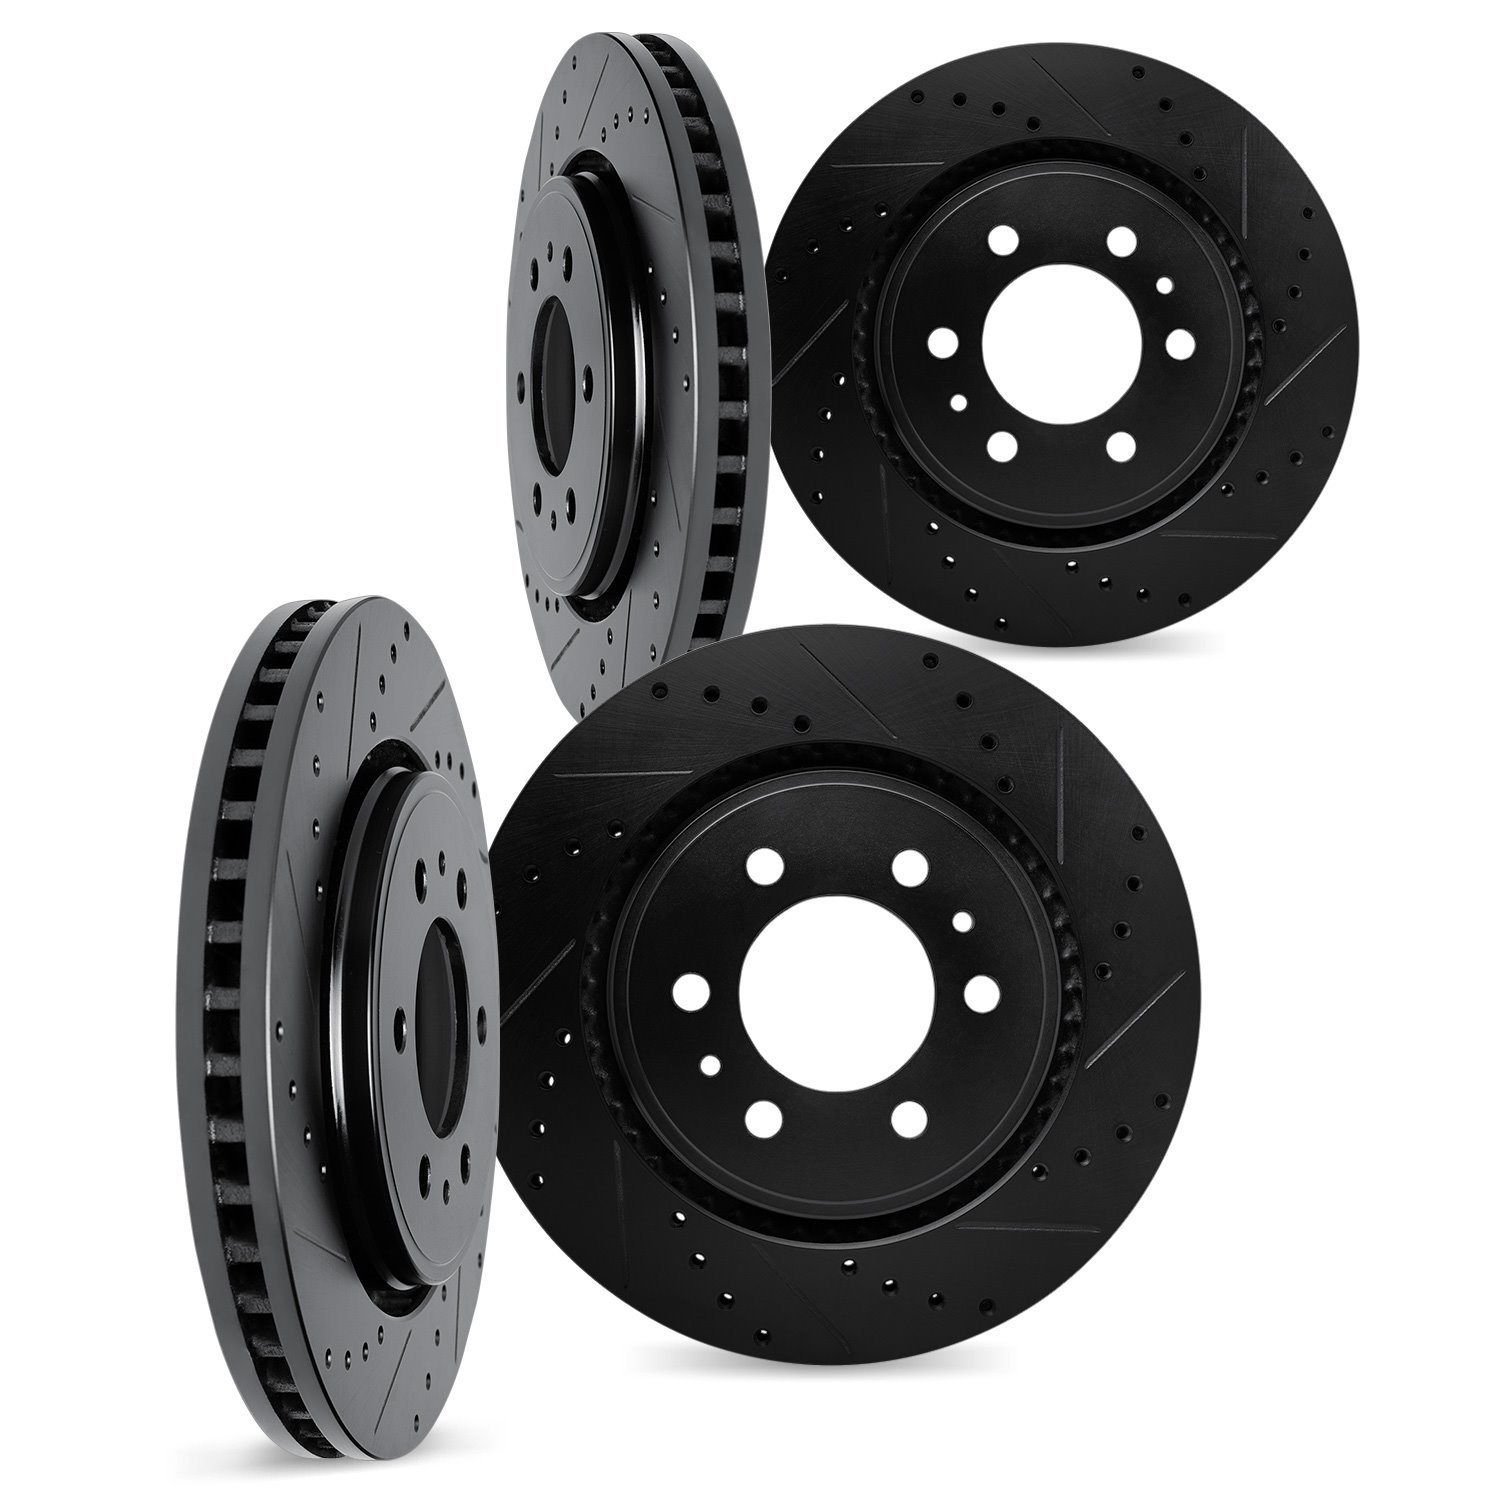 8004-48001 Drilled/Slotted Brake Rotors [Black], Fits Select GM, Position: Front and Rear